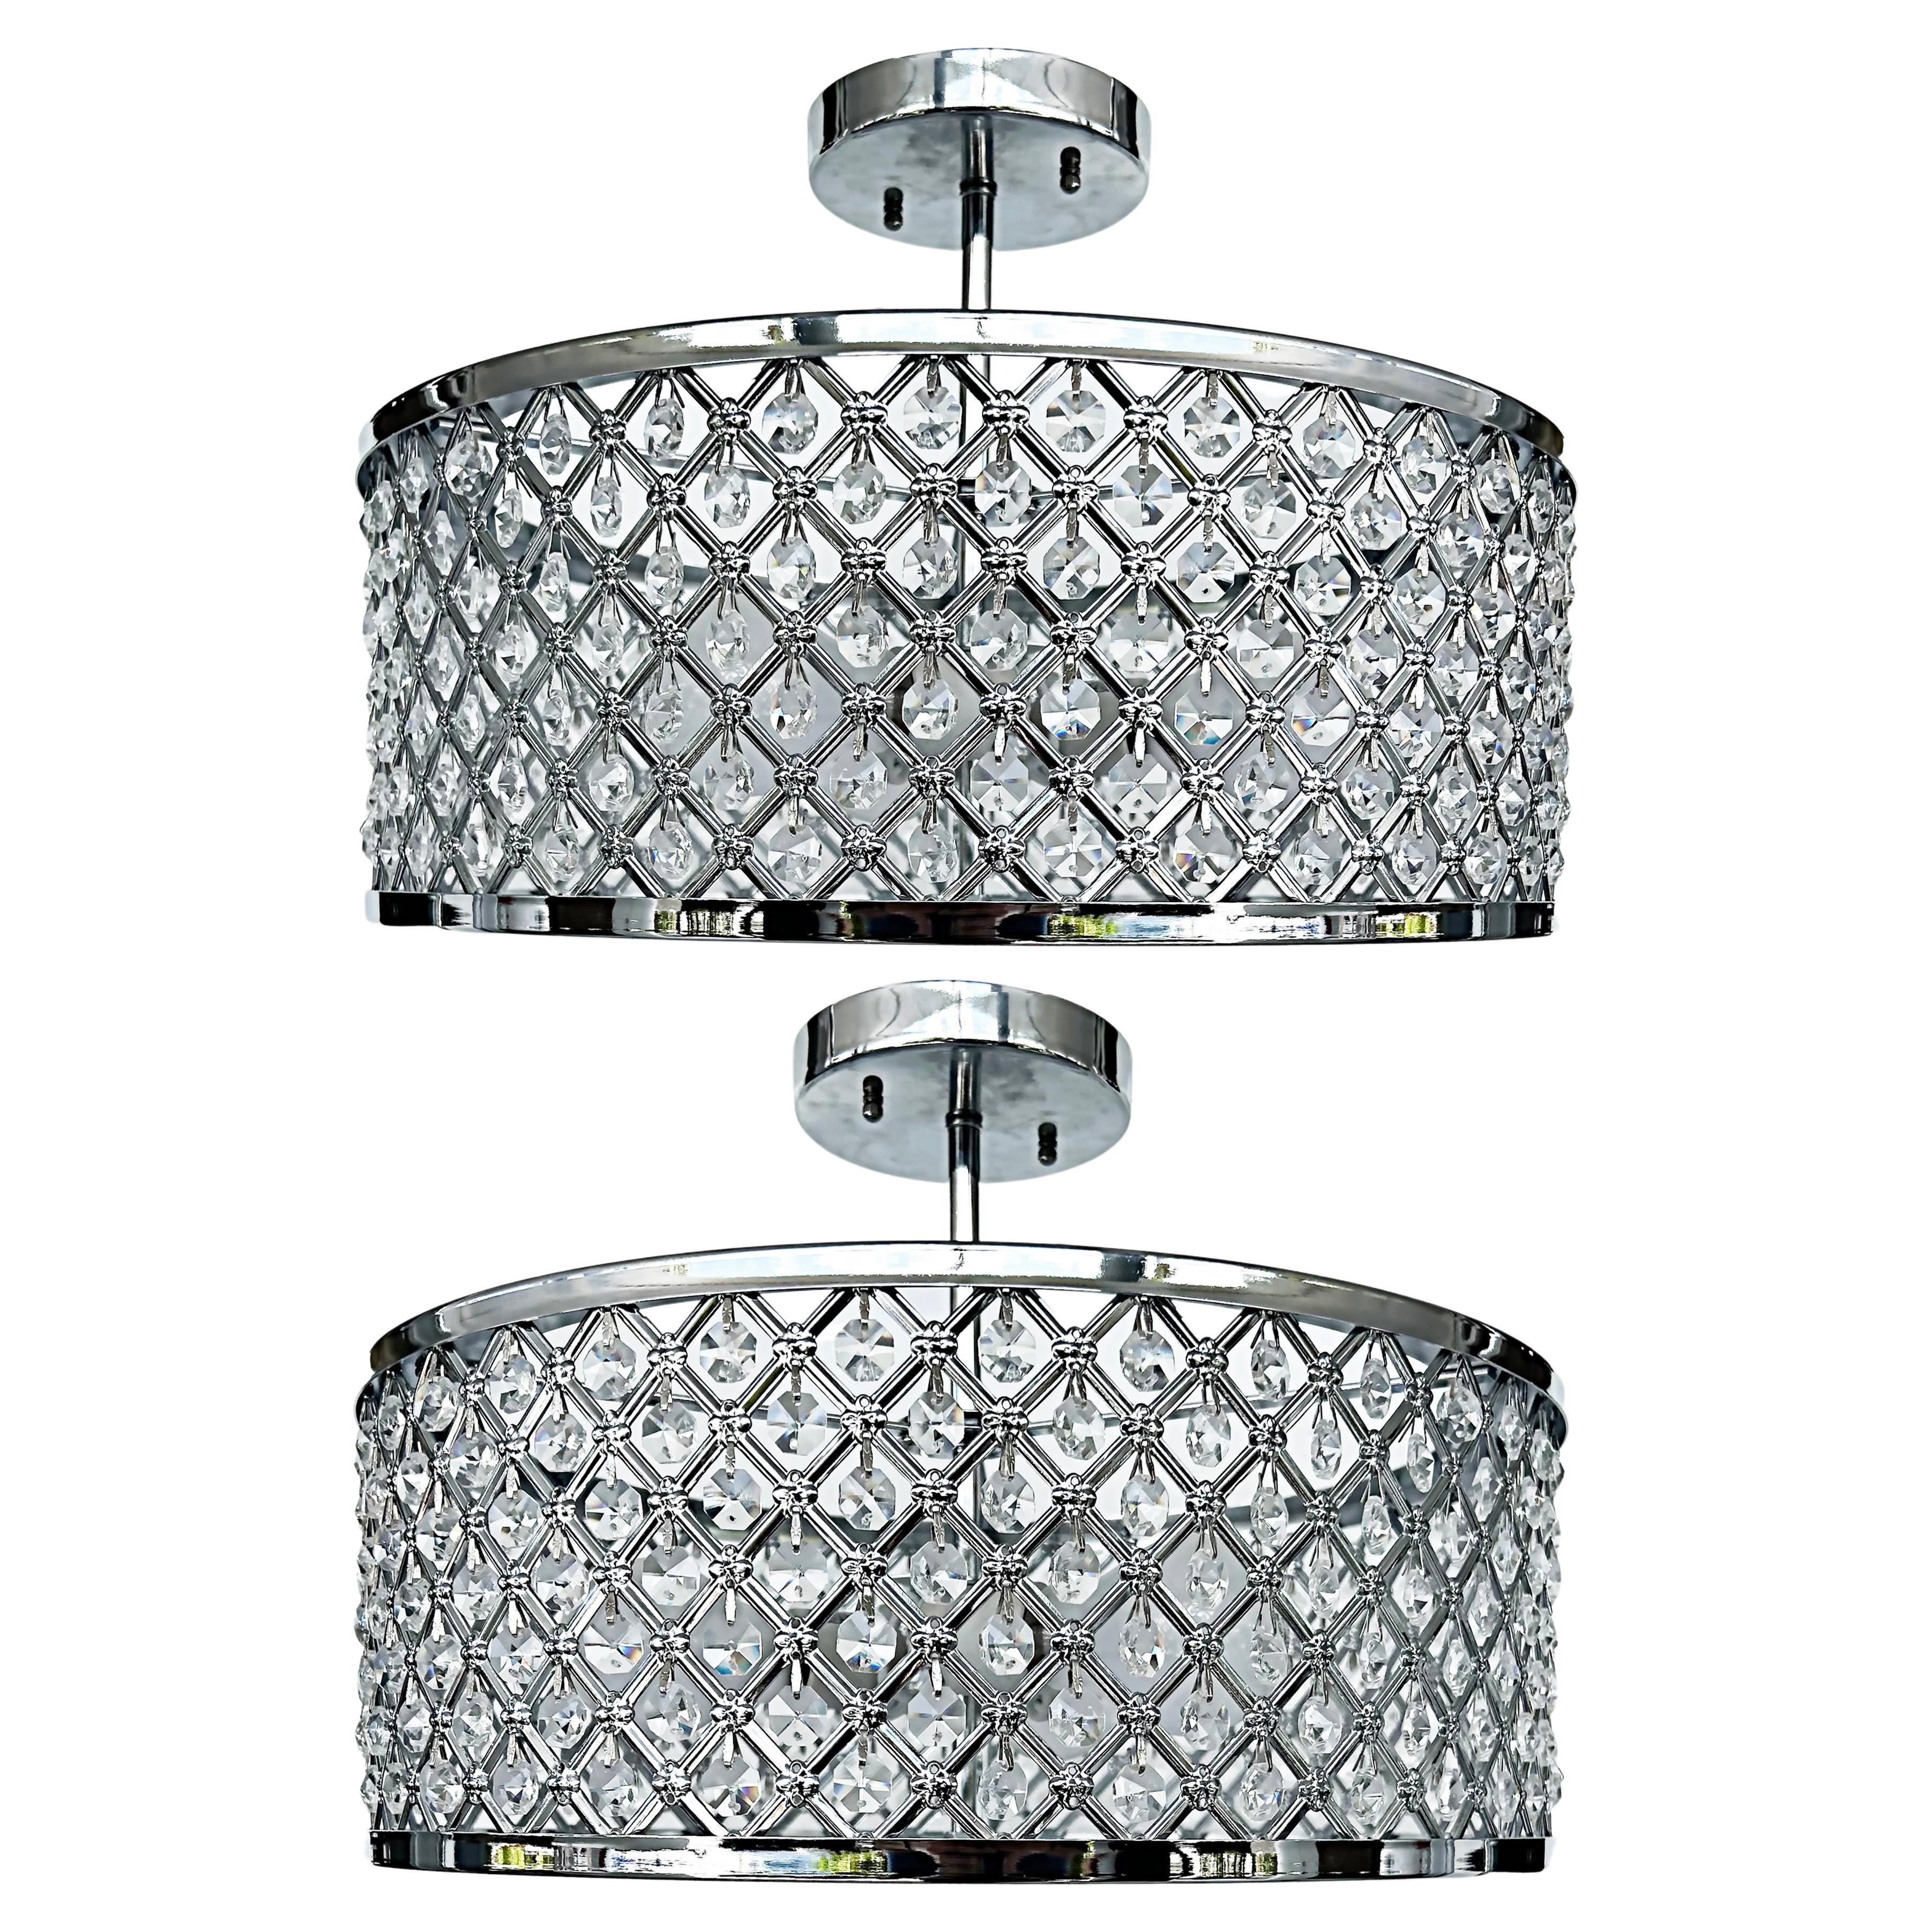 Cut Glass and Chrome Flush Mount Ceiling Light Fixture, One Available